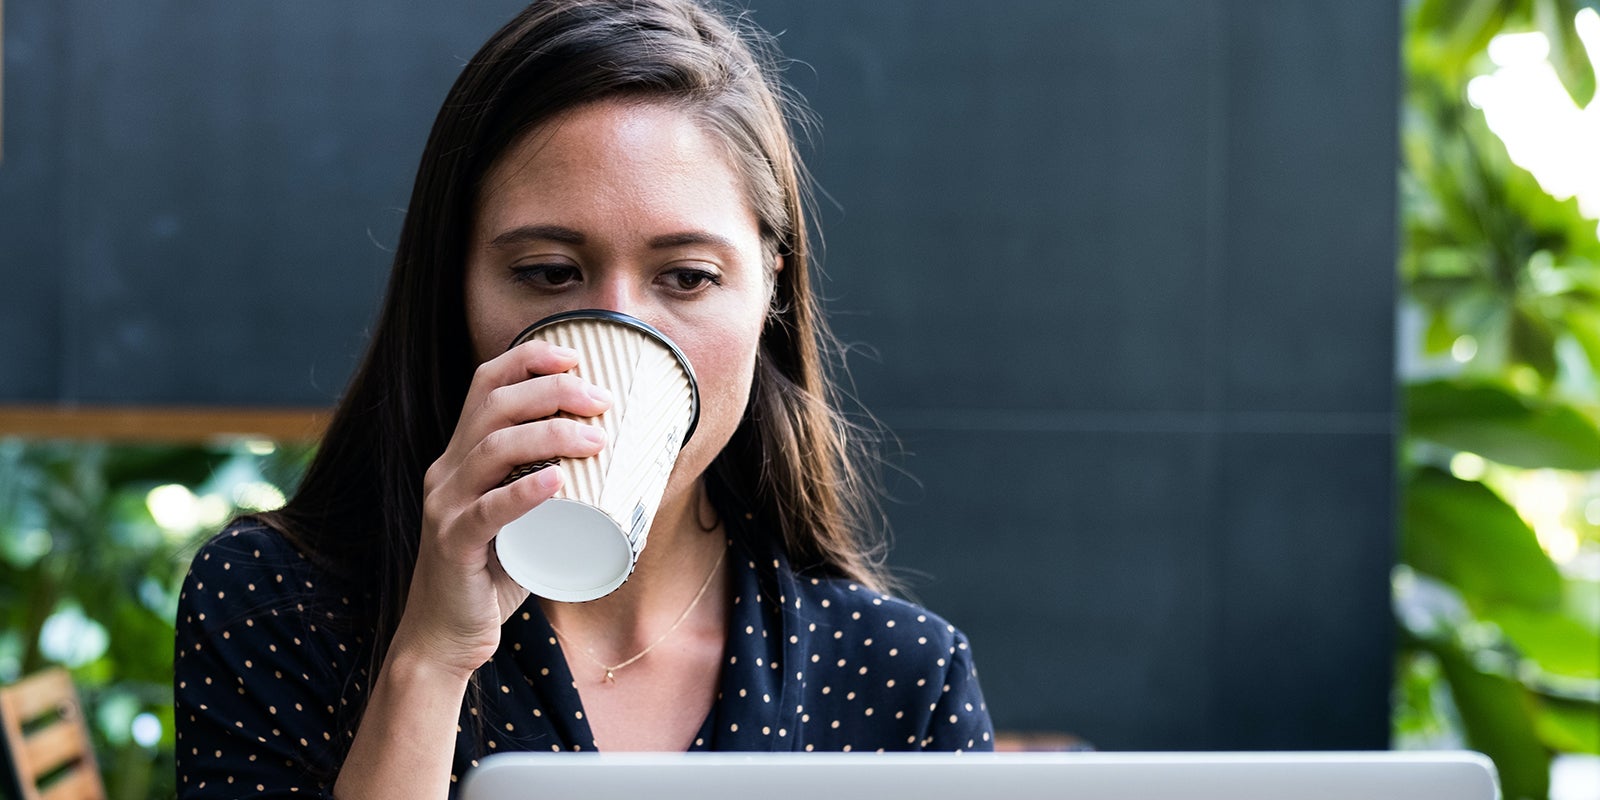 A woman drinking coffee while working at her laptop